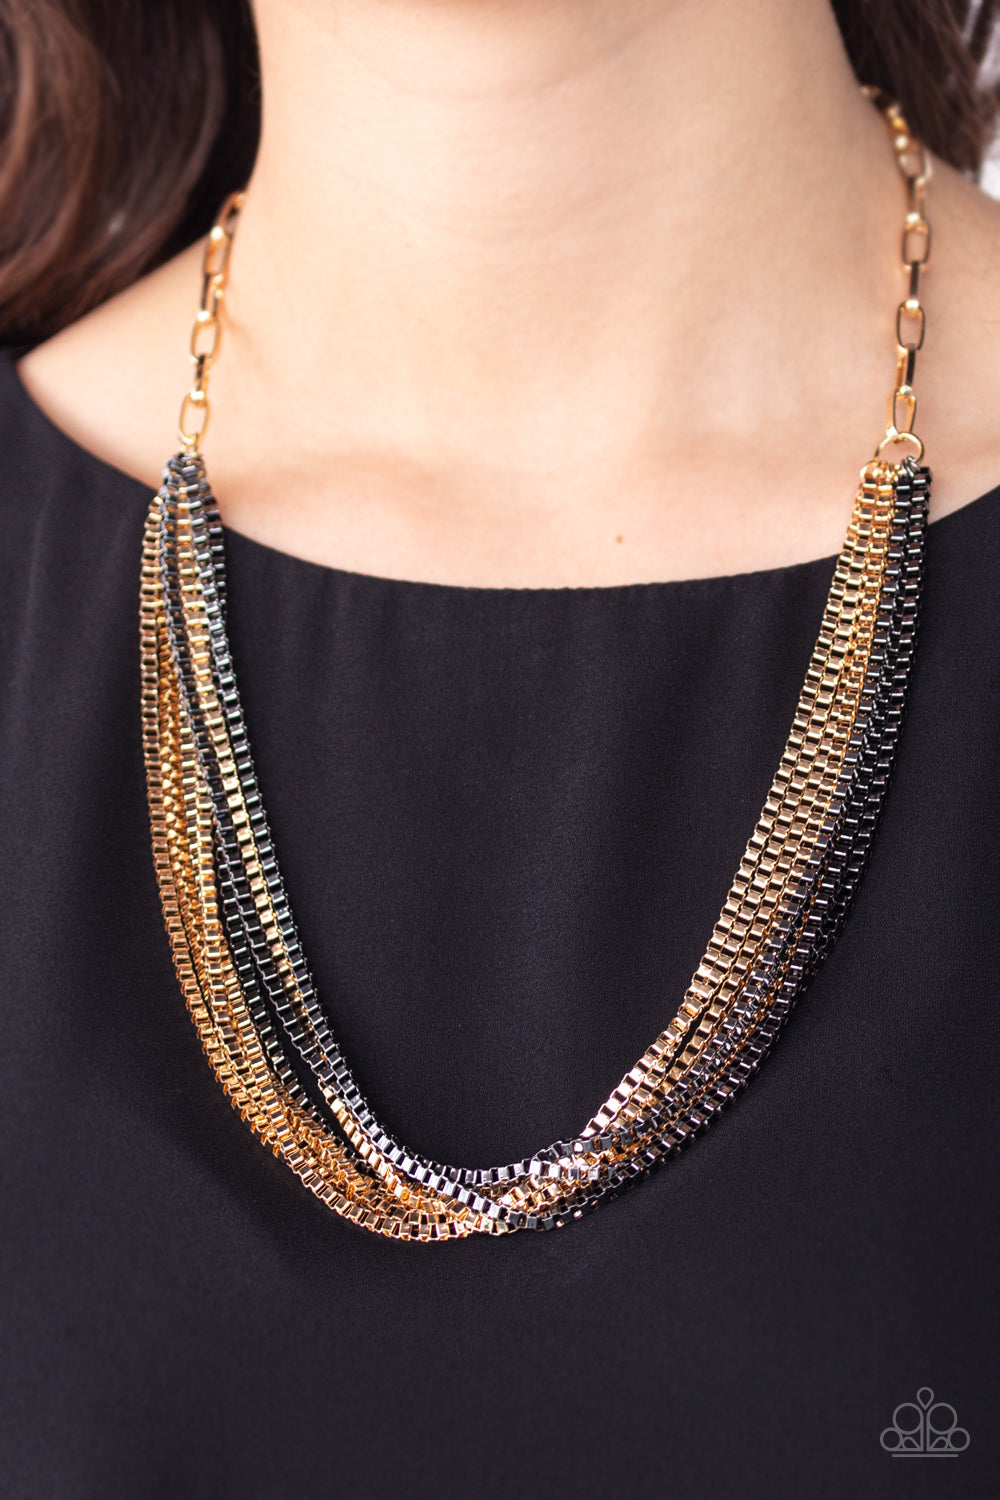 gold, gunmetal, black, gold jewelry, gunmetal jewelry, everyday jewelry, affordable jewelry, paparazzi accessories,gold jewelry, jewelry stores, jewelry stores near me, necklace, layered necklace, 